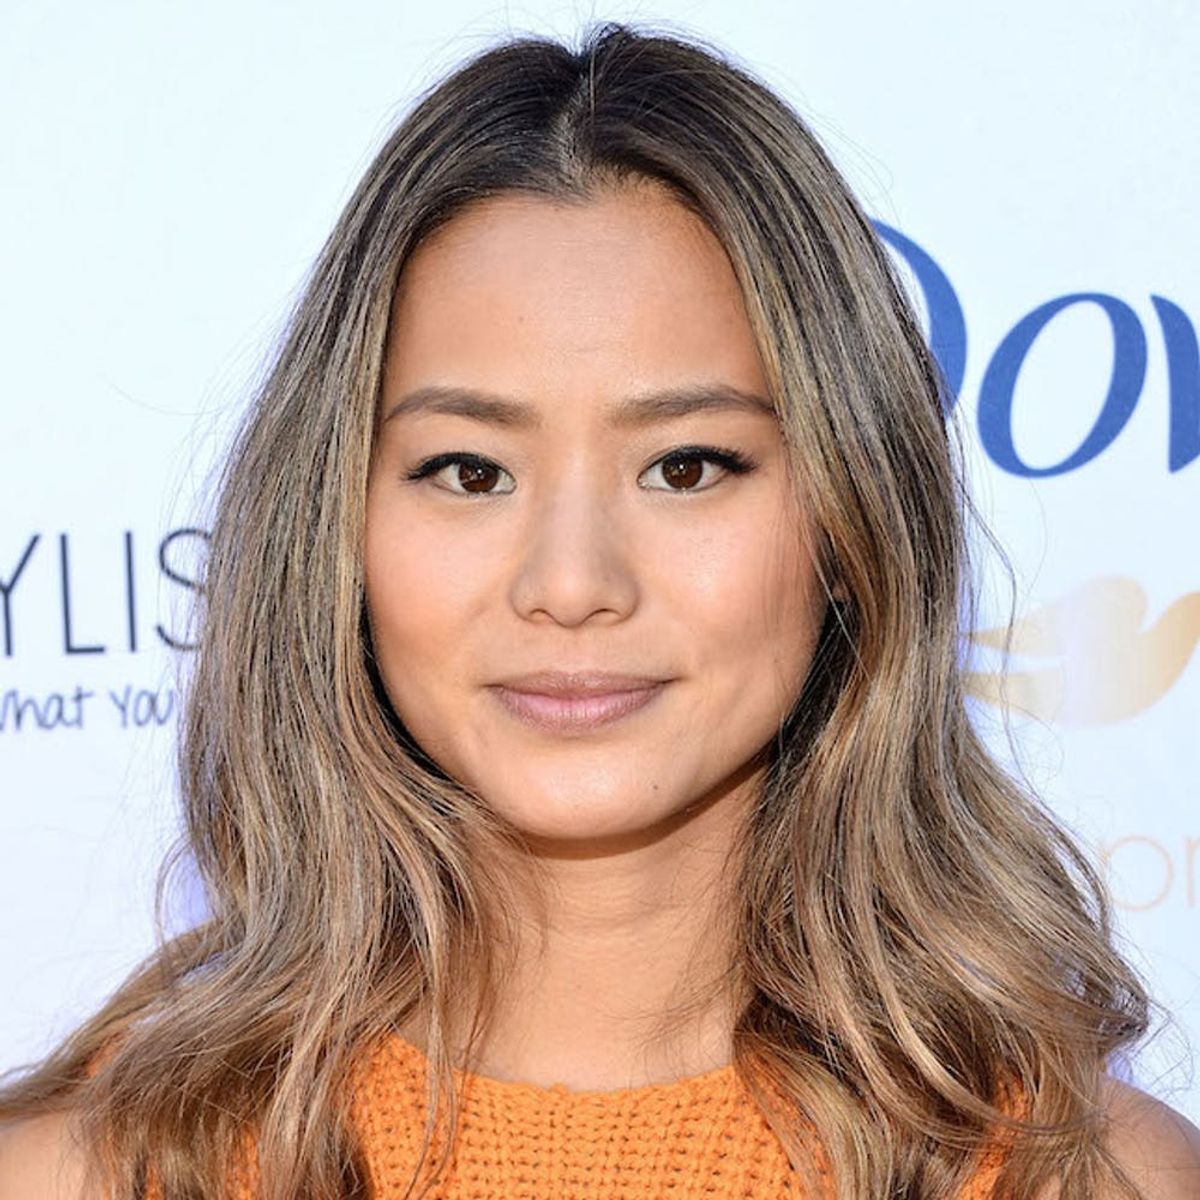 Get the Look of Jamie Chung’s Beachy Chic Kitchen